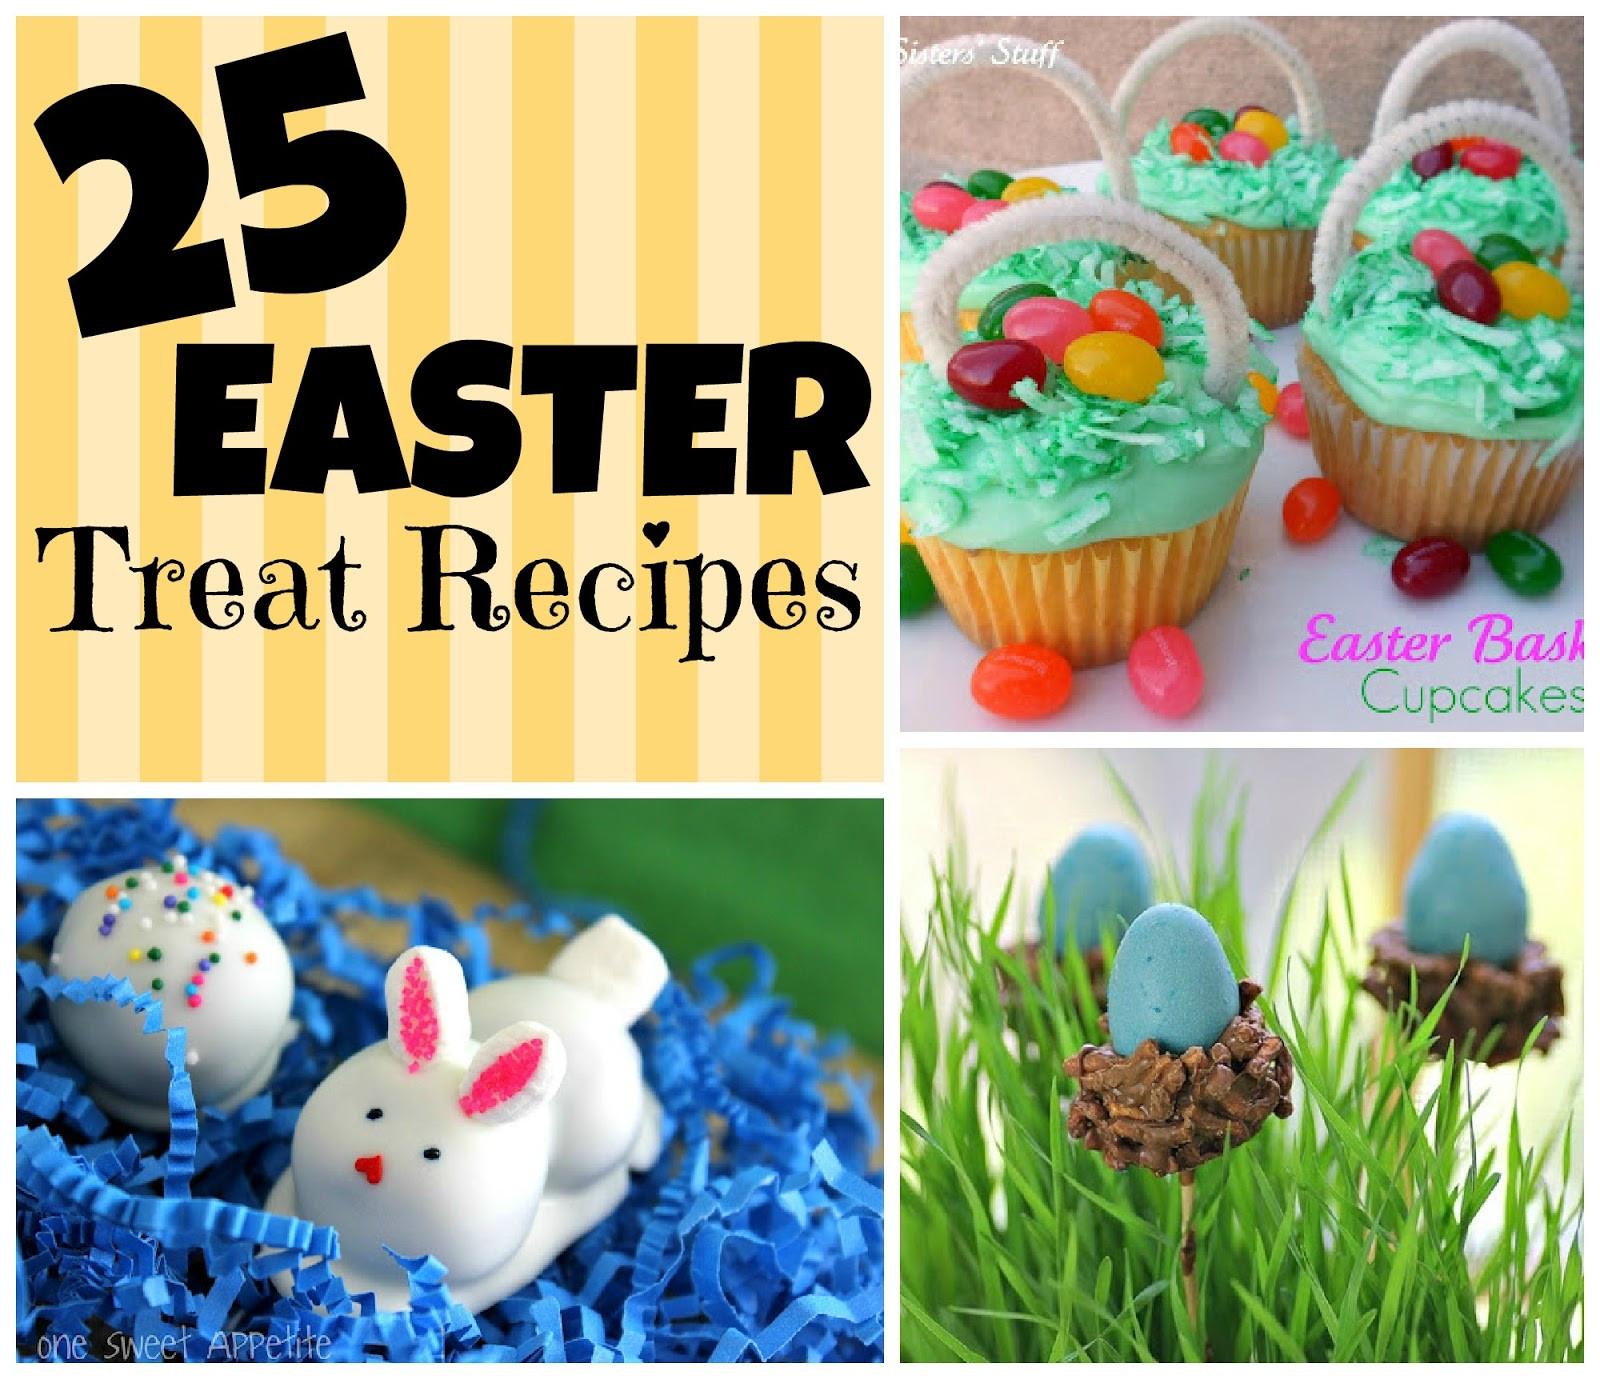 Easter Goodies Ideas
 25 Easter Treat Recipes